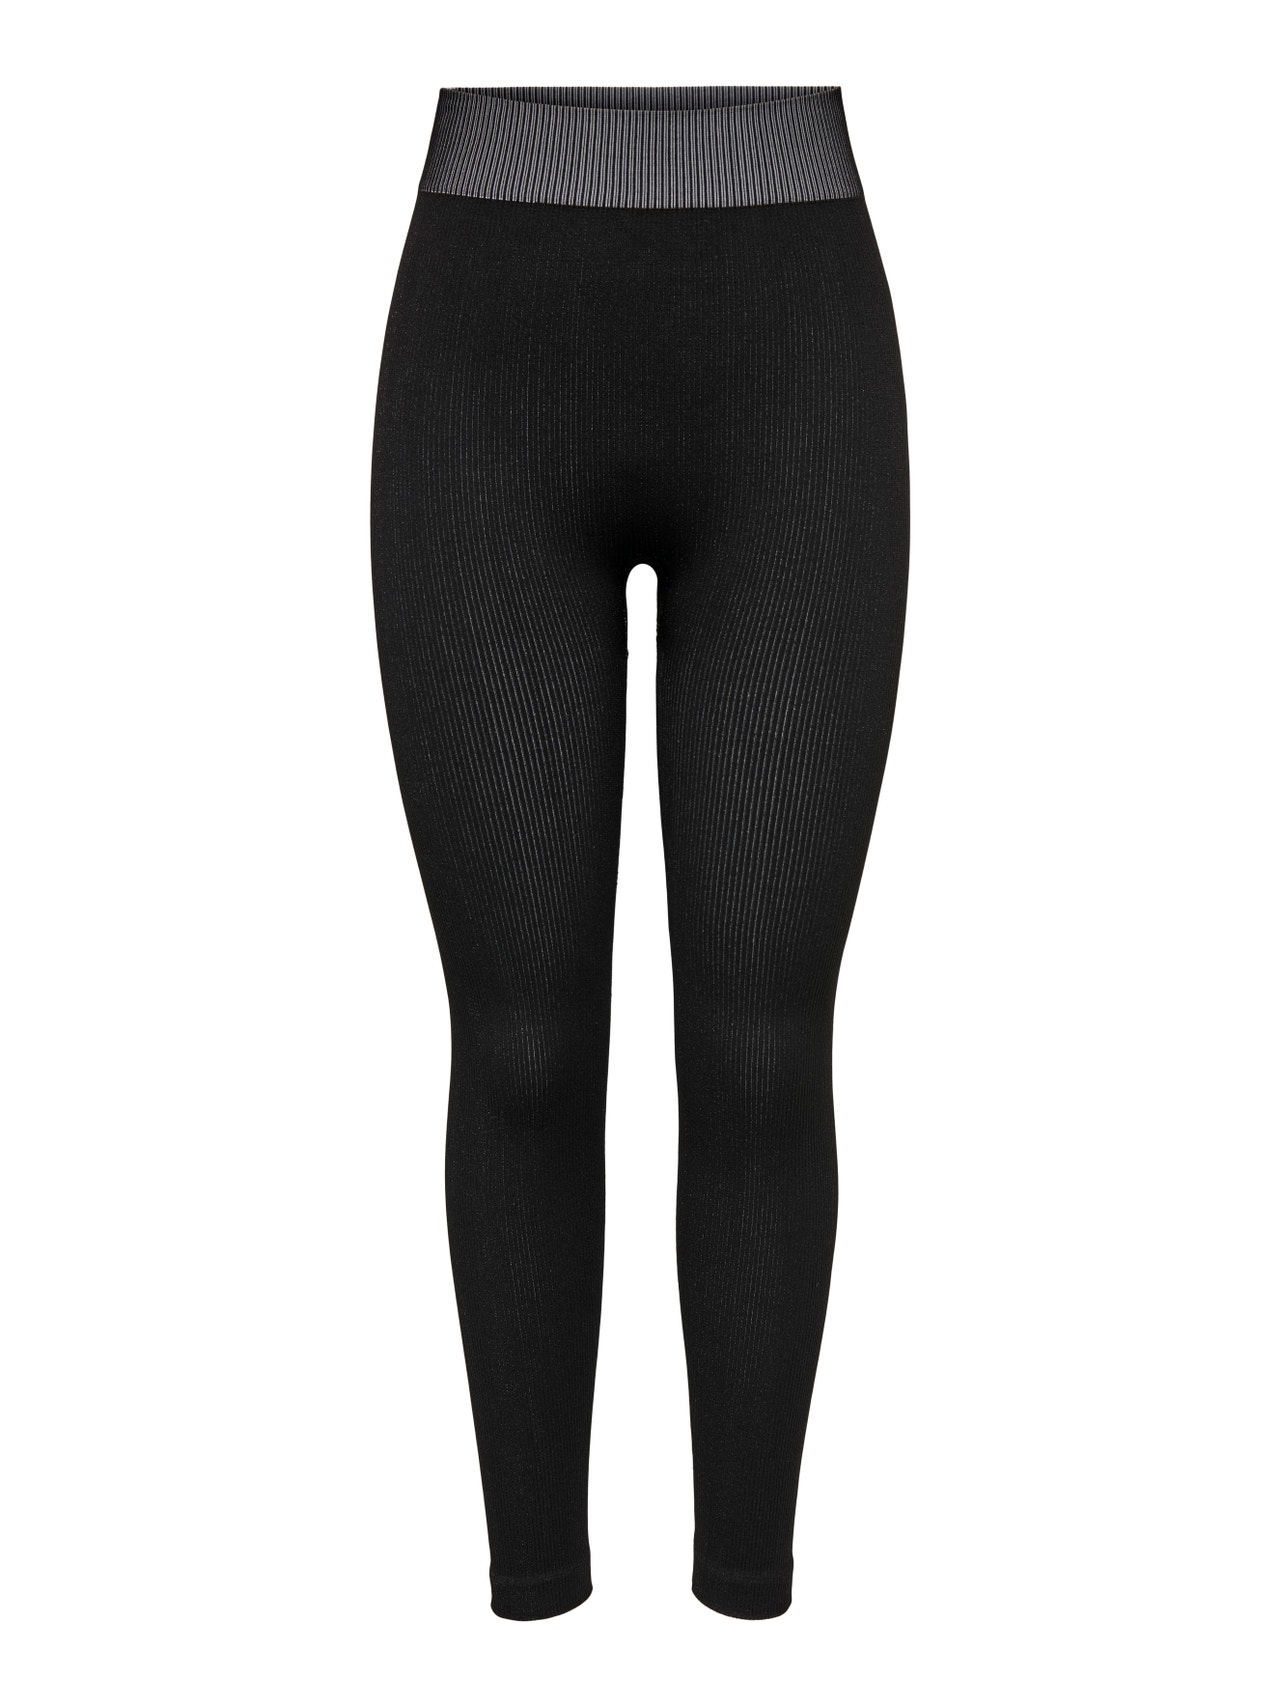 ONLY Tight Fit Leggings -Black - 15274236